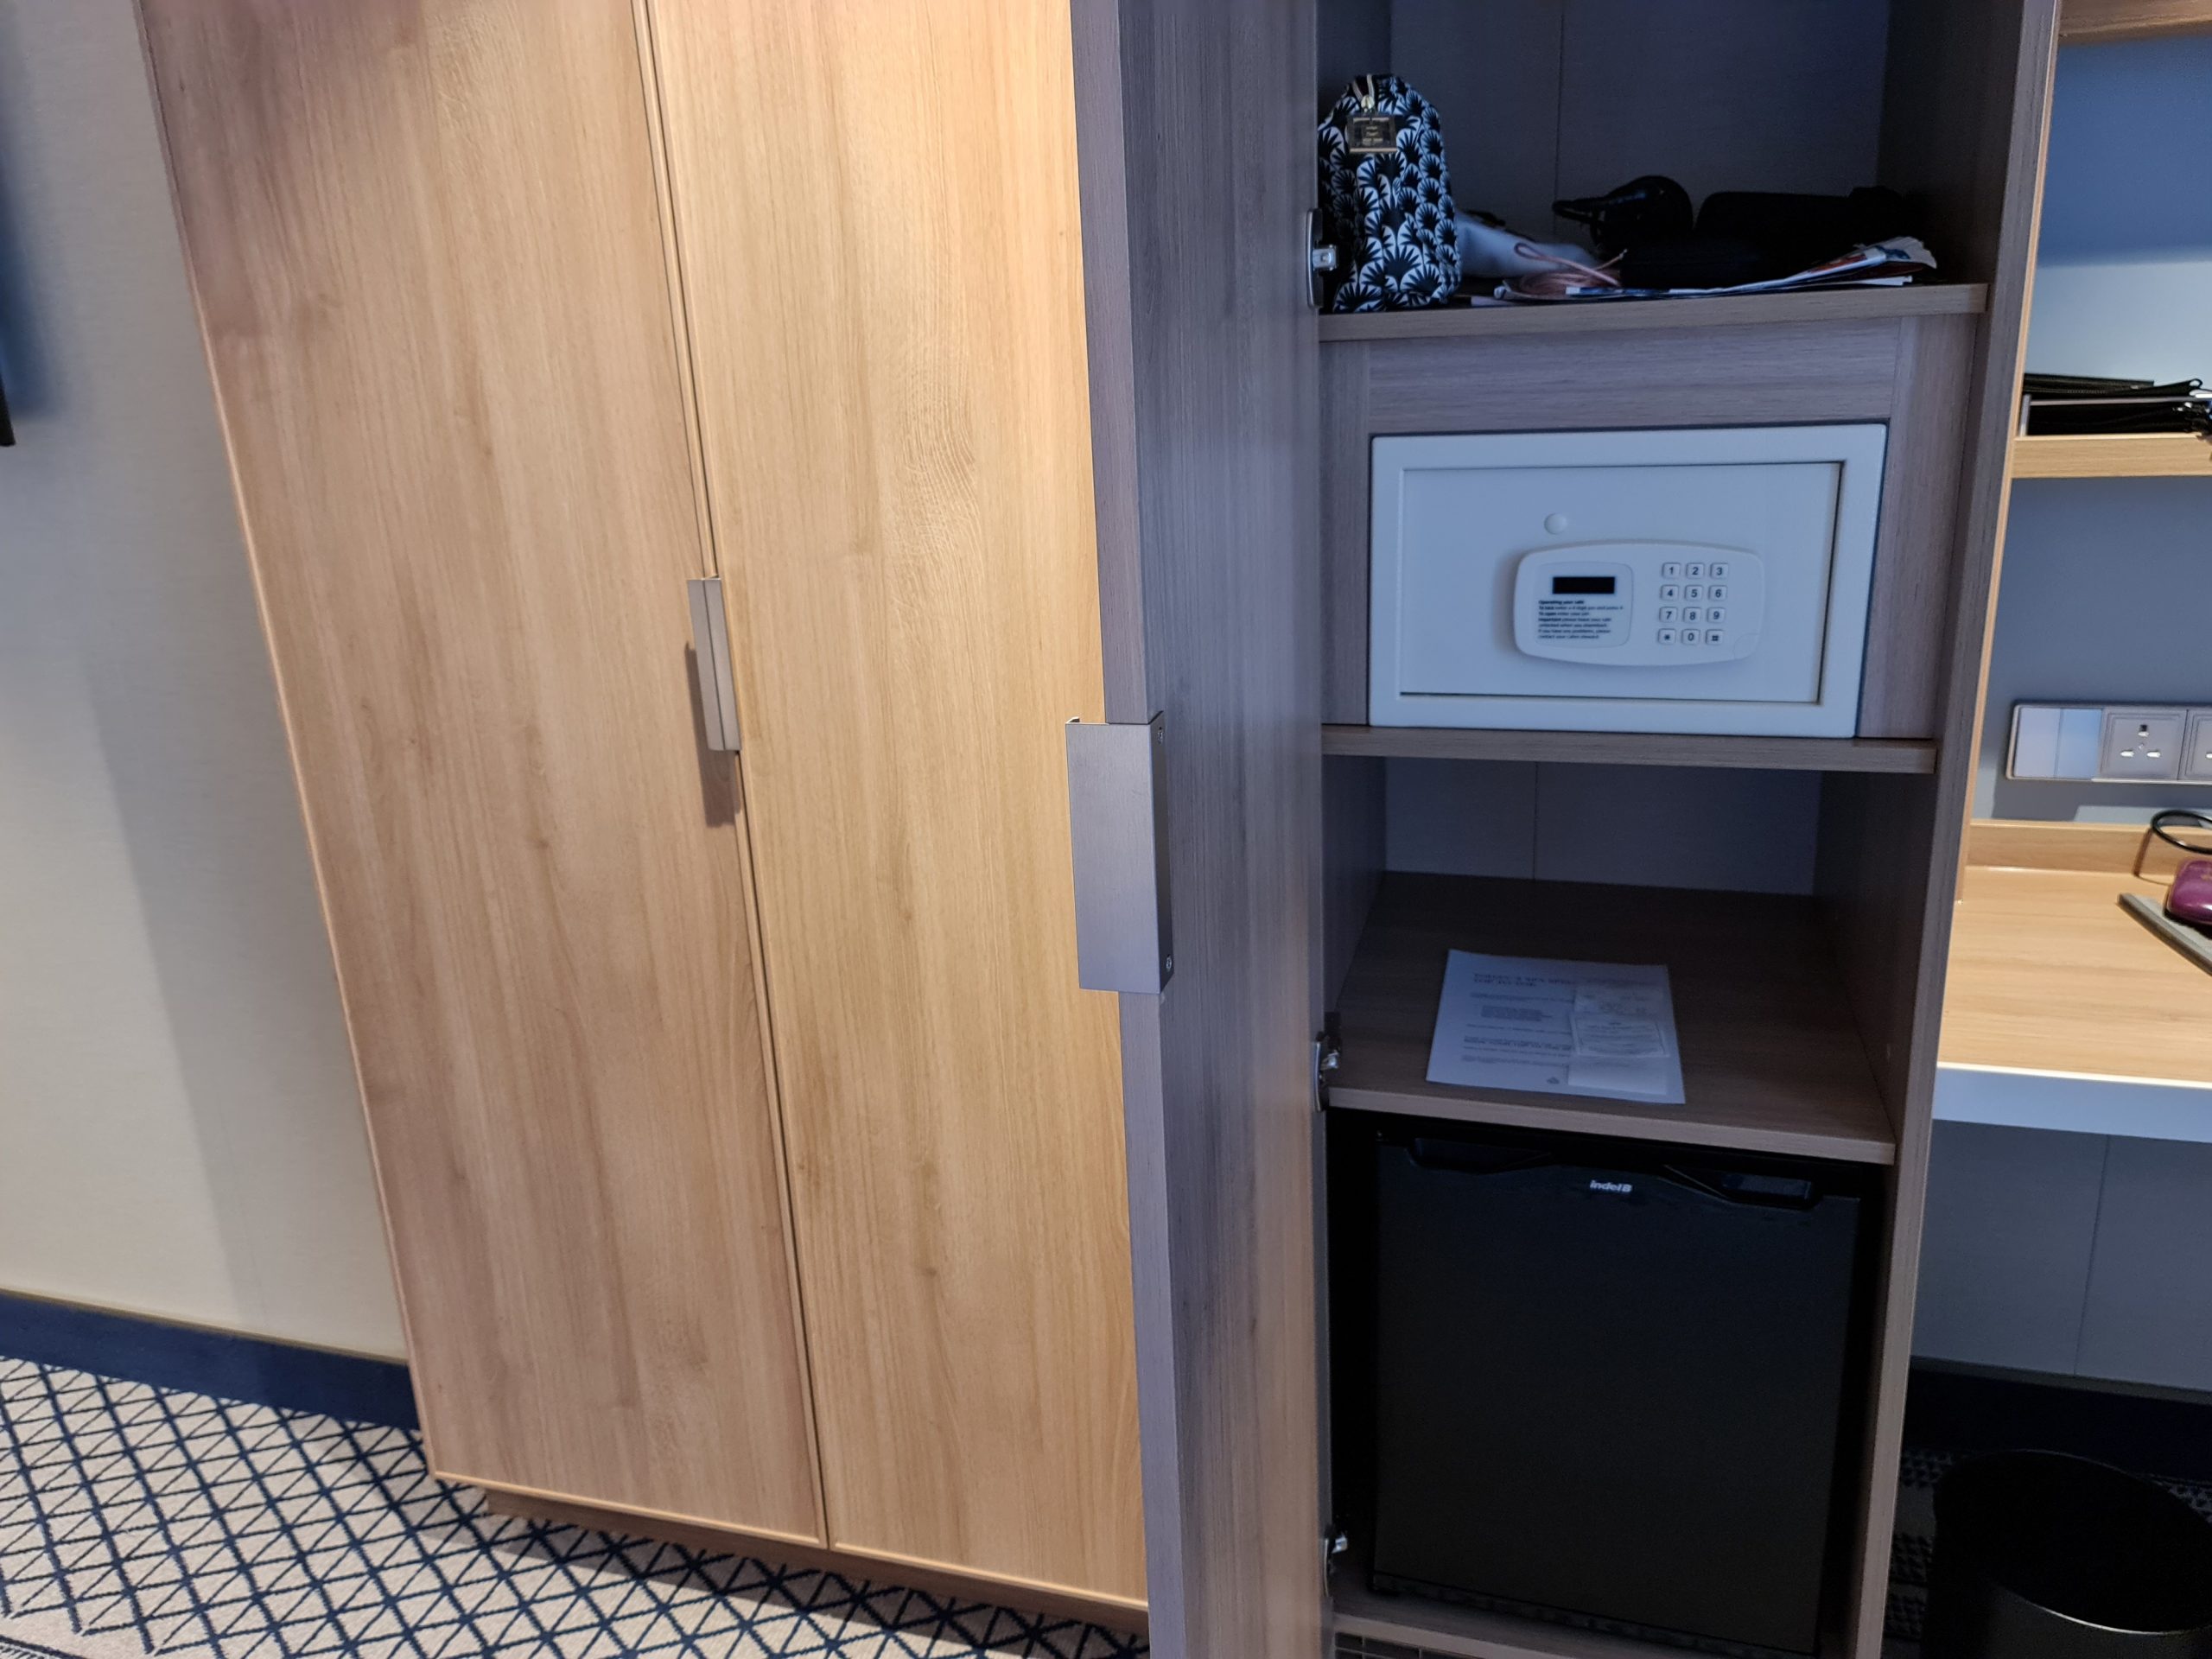 P&O Iona Accessible Balcony Cabin 12514 Review Storage space wardrobes and cupboards